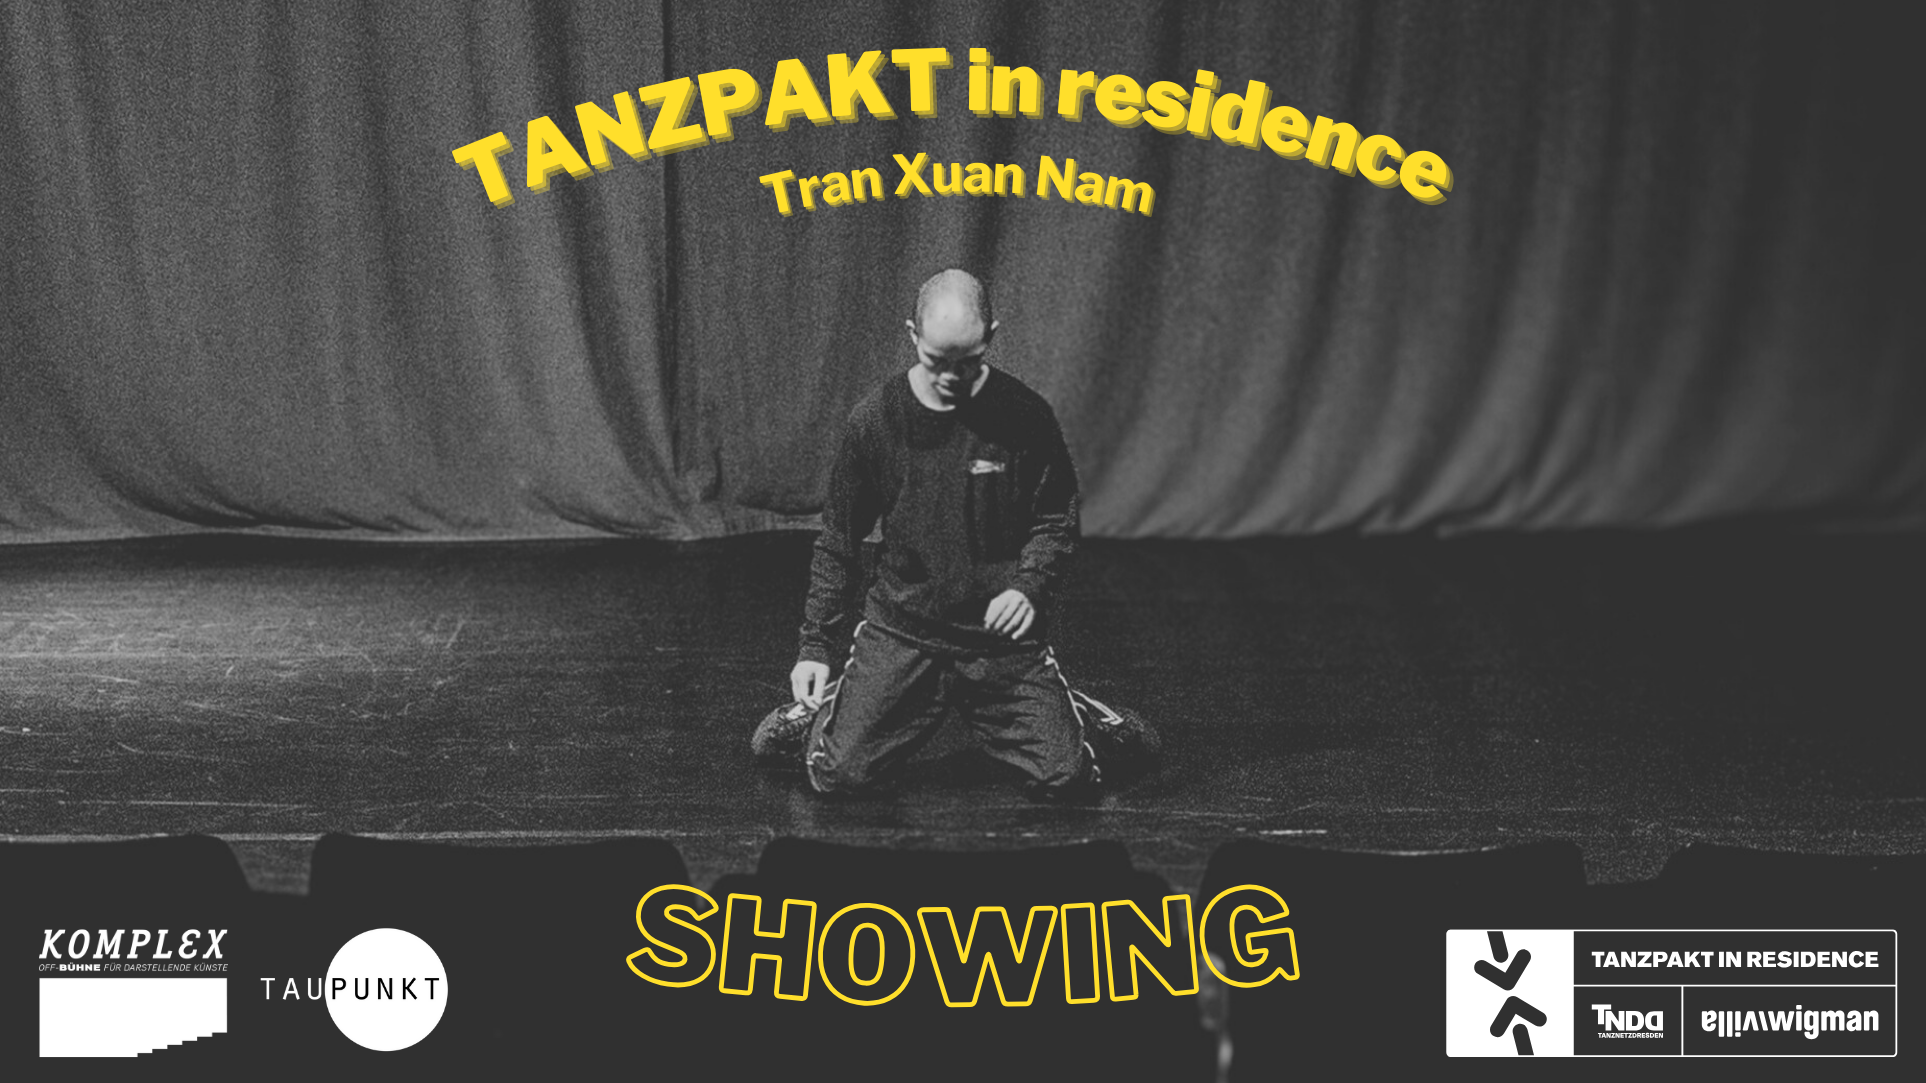 Showing: „TANZPAKT in residence“